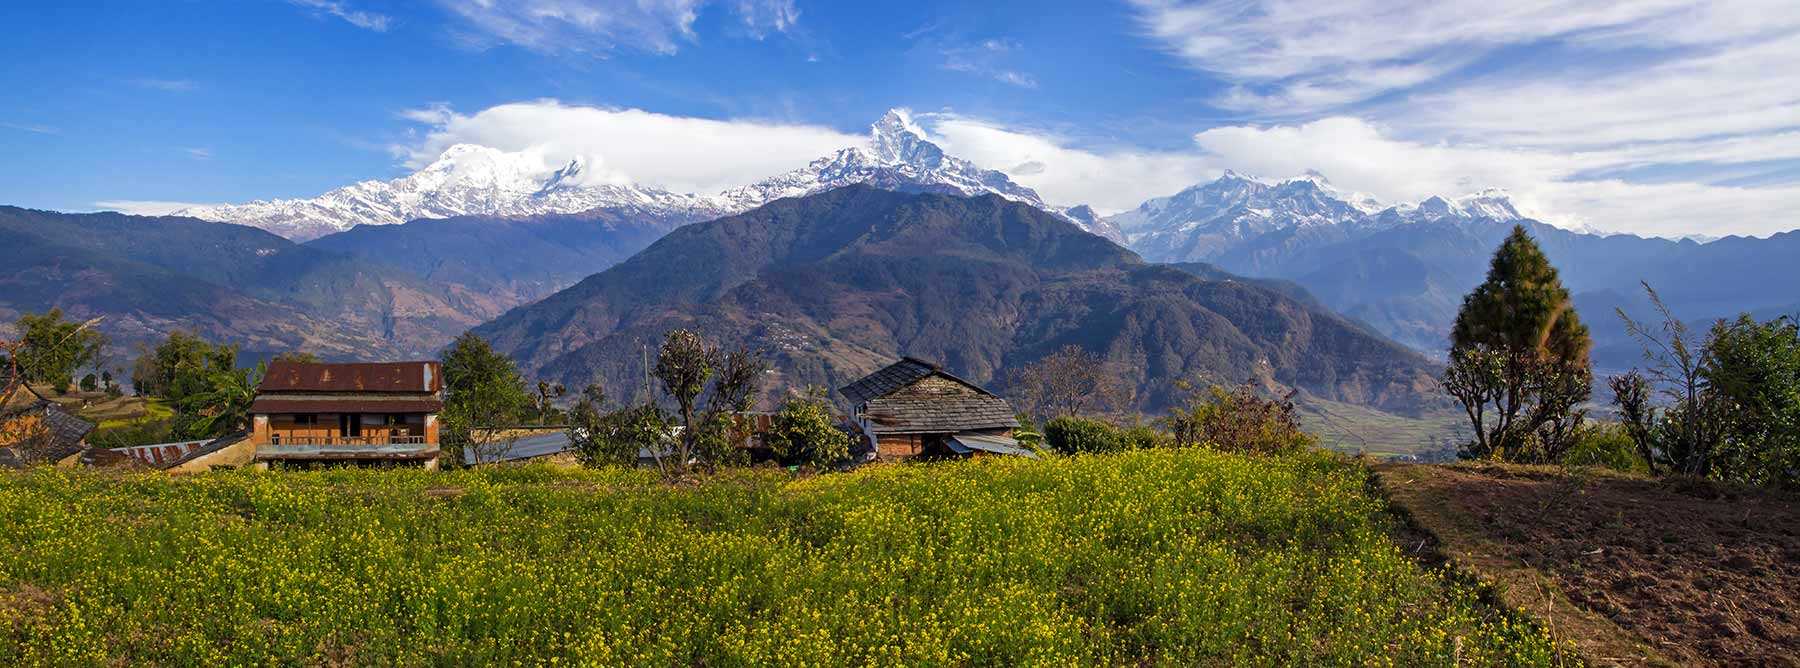 Nepal Village Home Stay Tour